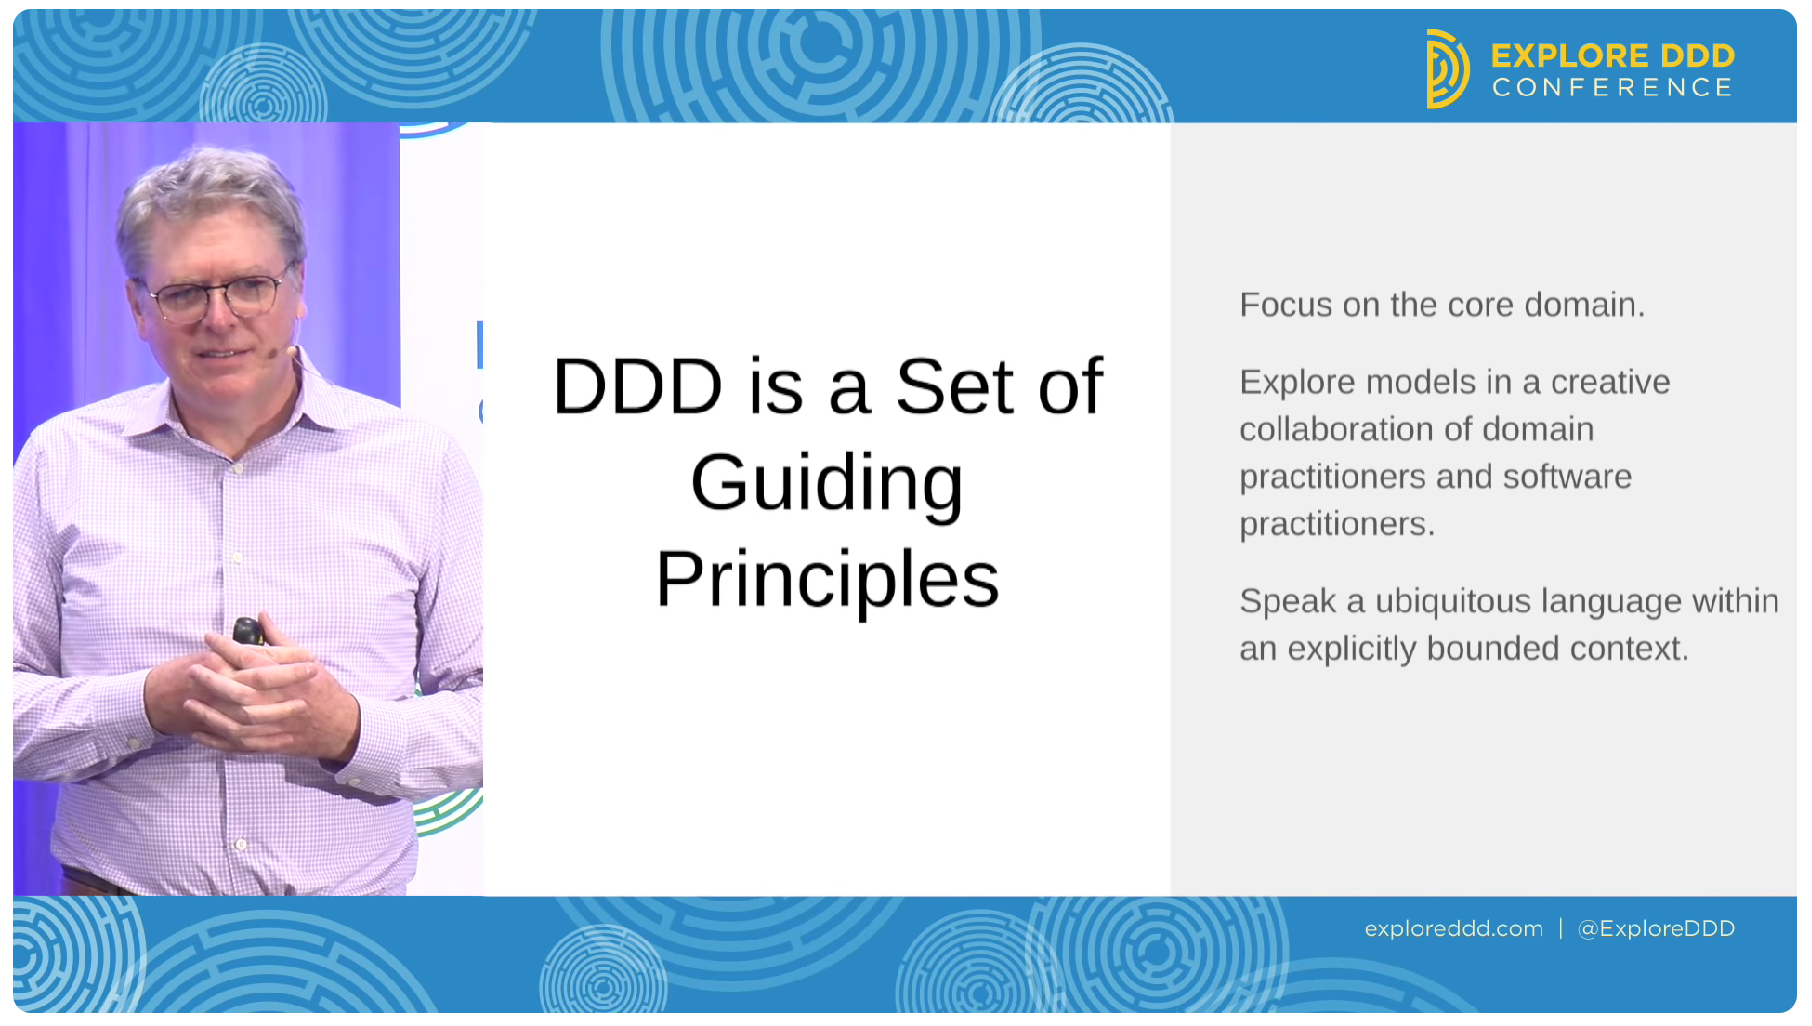 Eric Evans providing a definition for DDD at Explore DDD 2018